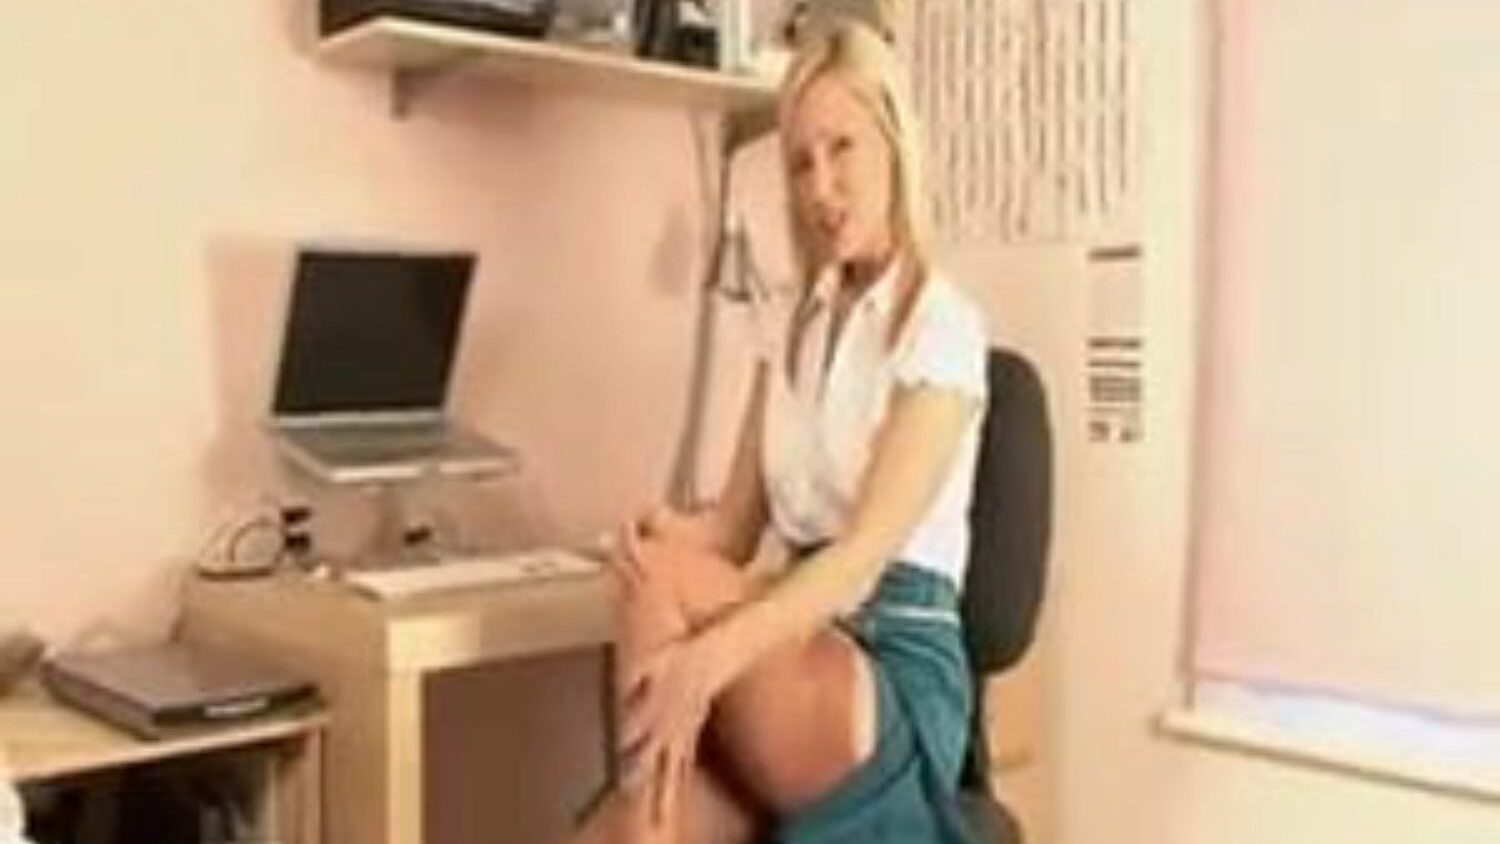 British blond secretary clothed to get your upright British blond secretary dressed to get your erect Wearing utter style stockings and black high heel pumps.